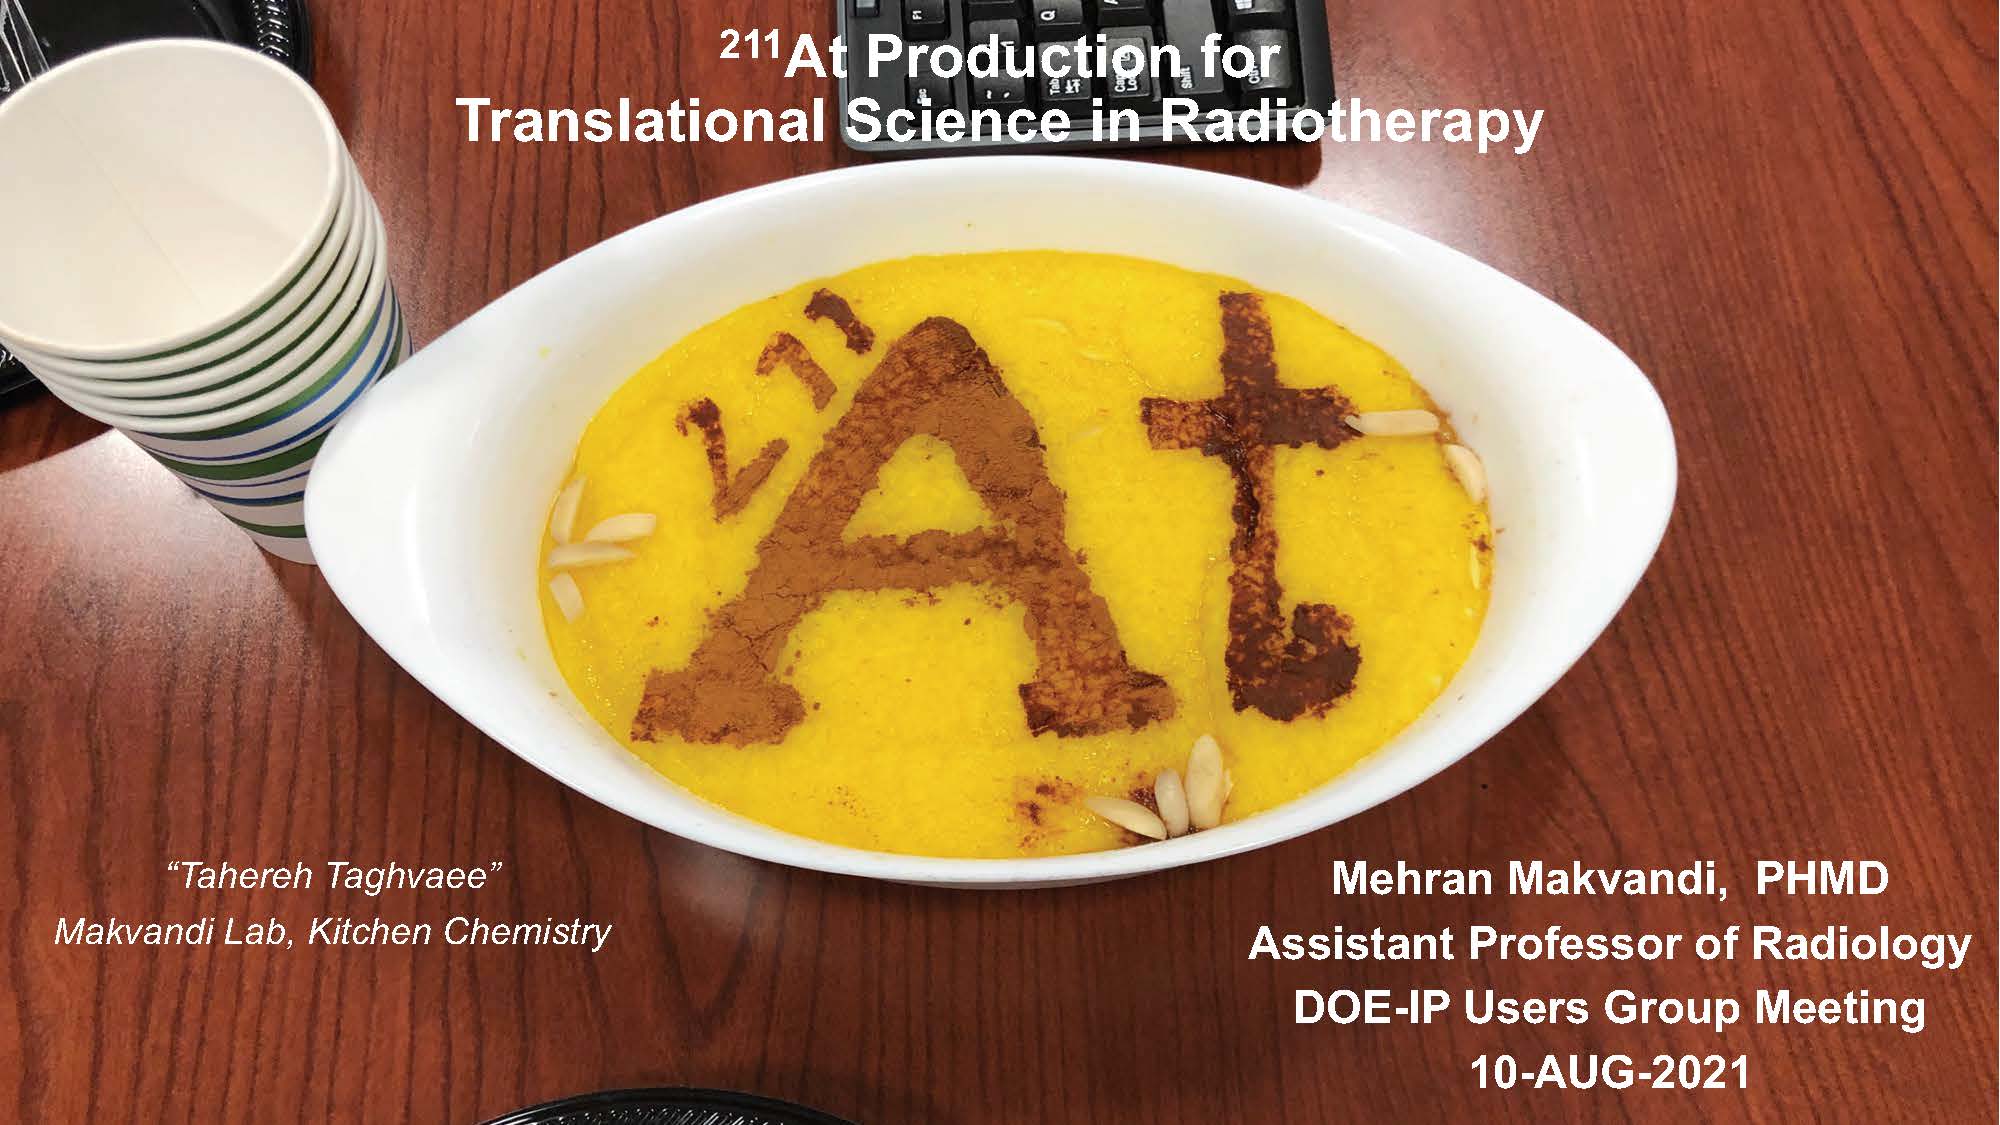 At-211 Production for Translational Science in Radiotherapy by Dr. Mehran Makvandi, University of Pennsylvania